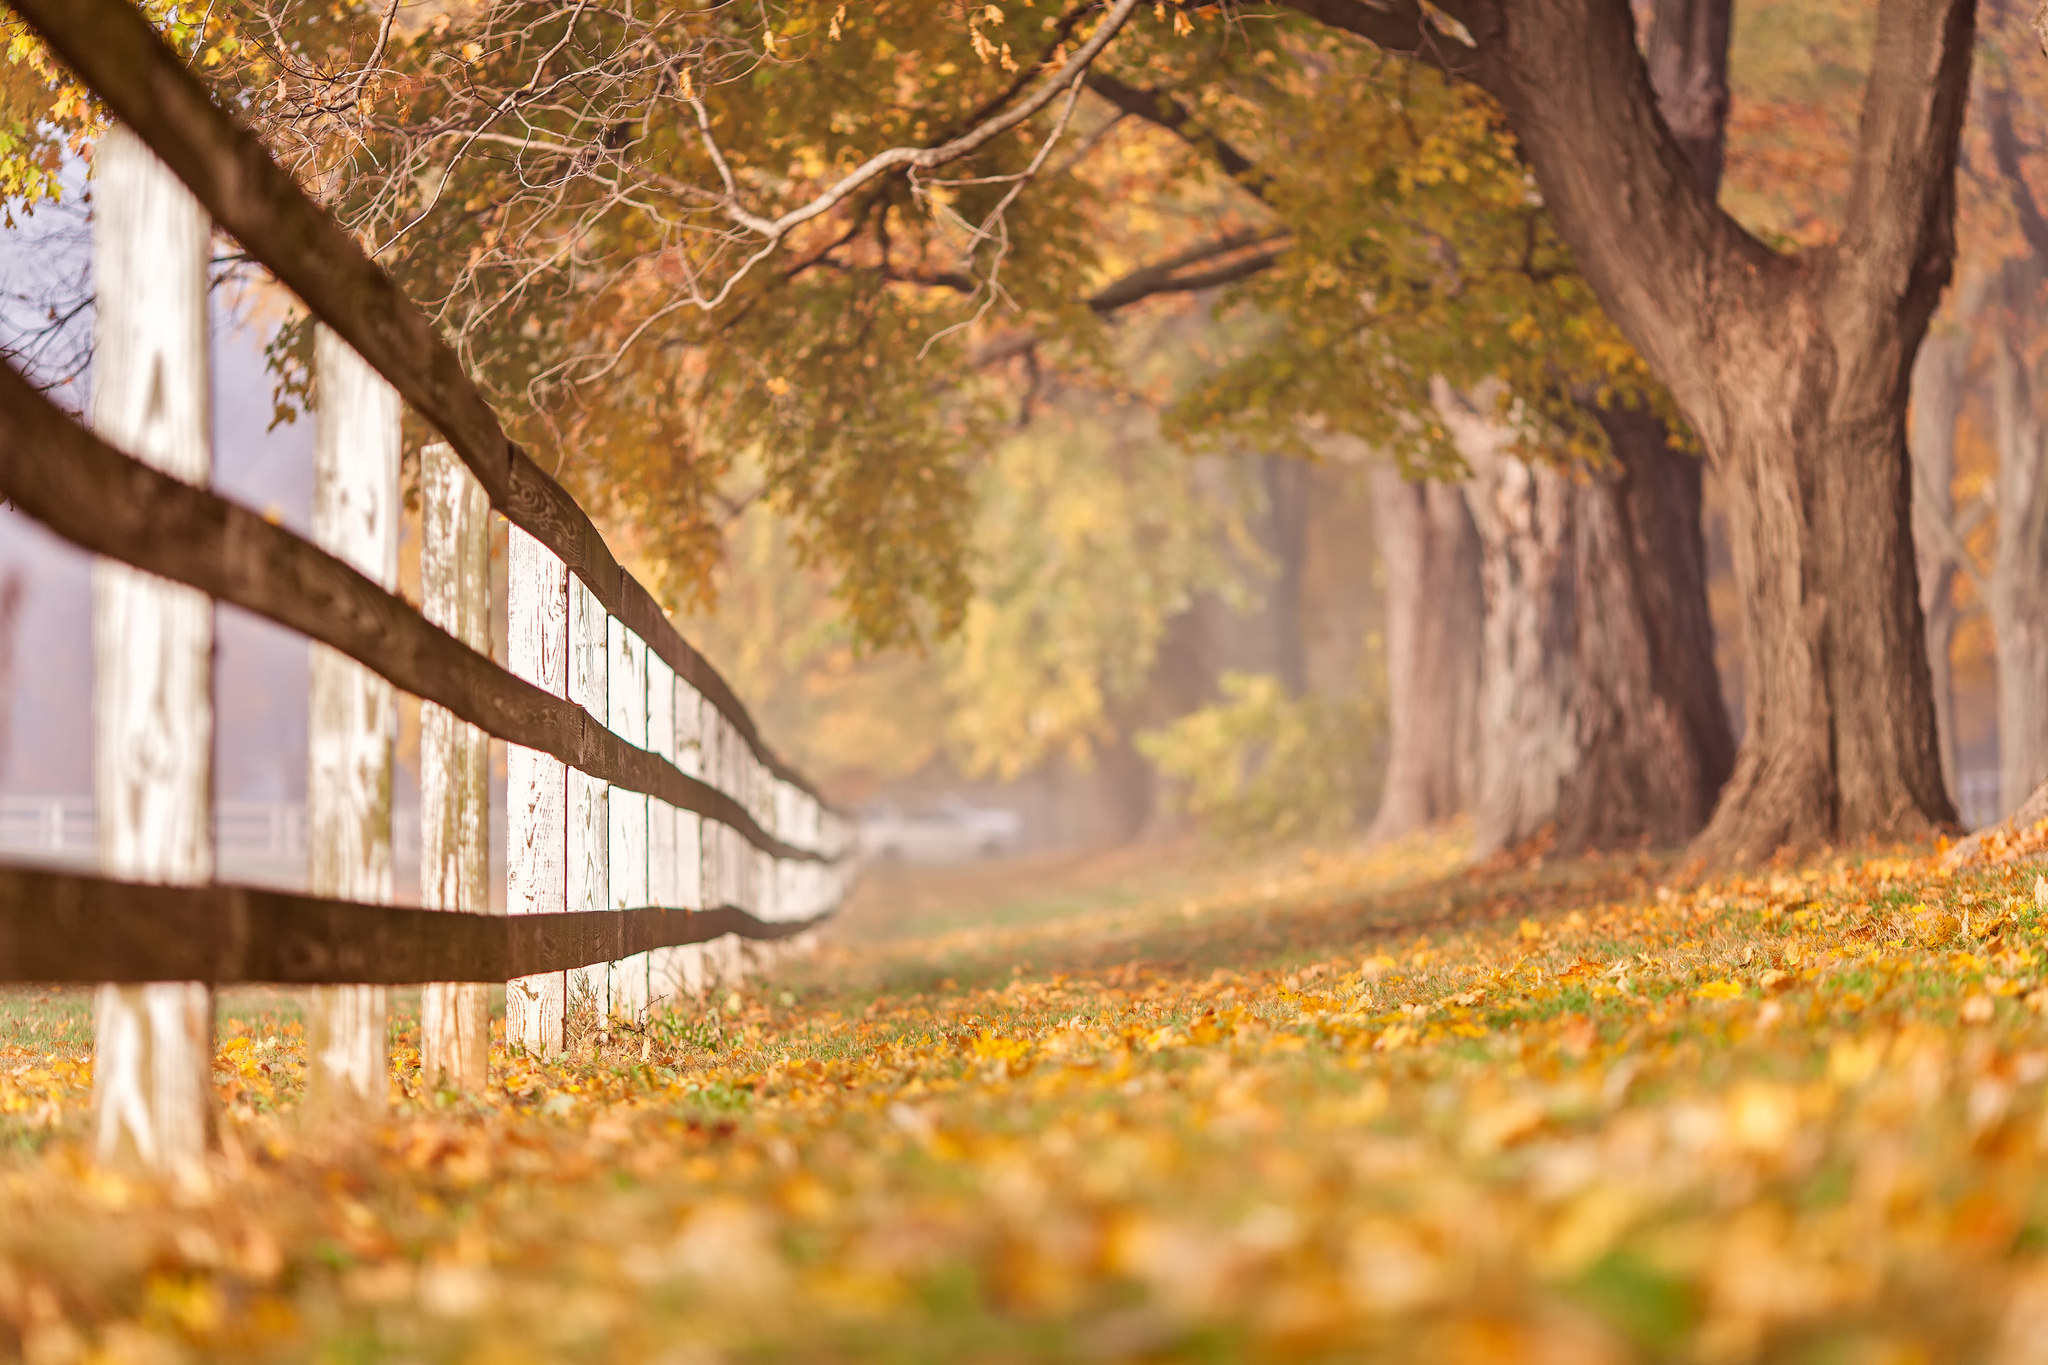 General 2048x1365 trees fence fall fallen leaves